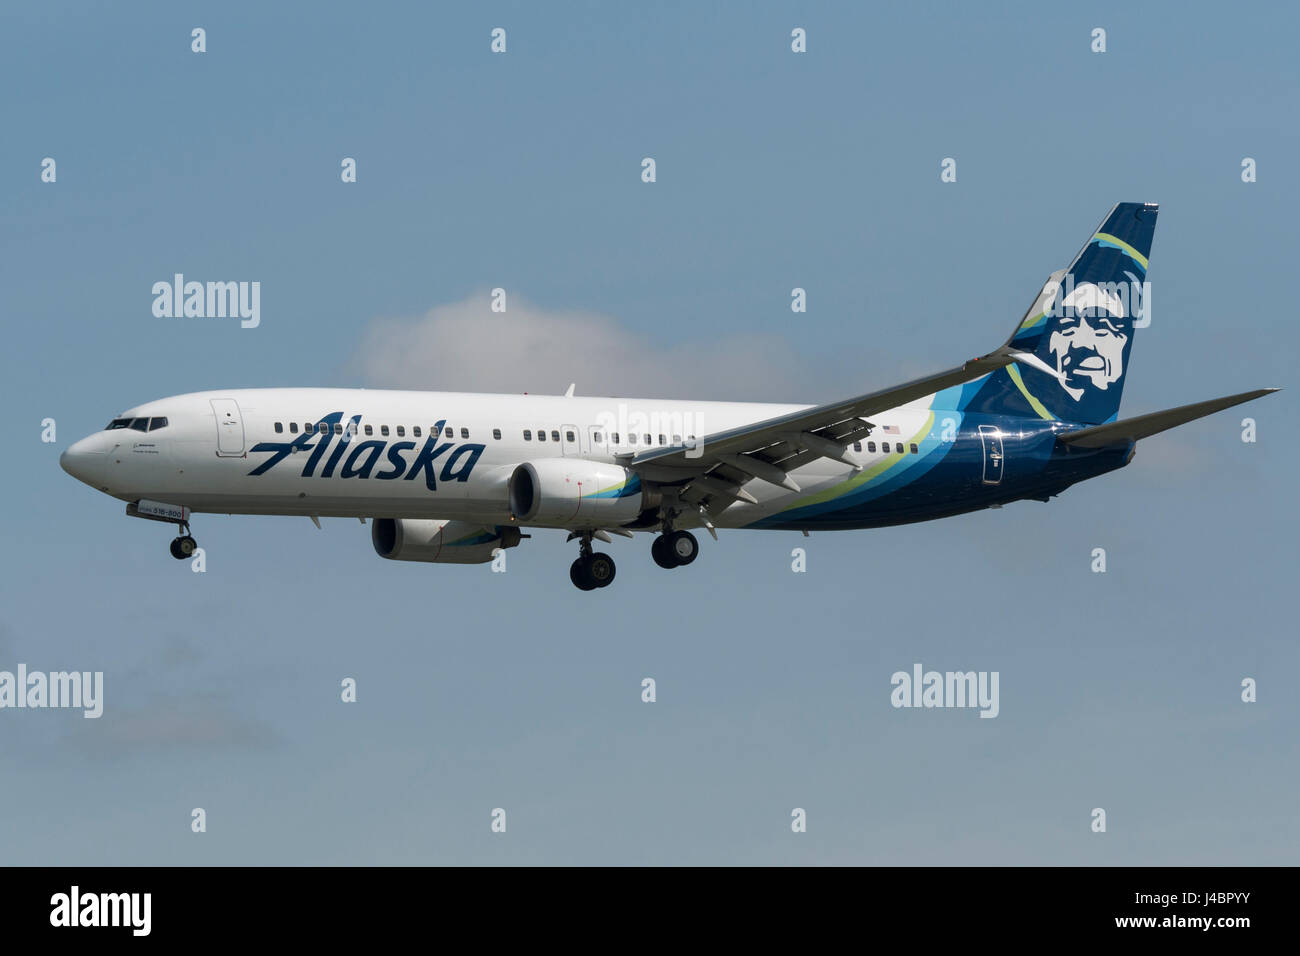 Alaska Airlines plane airplane Boeing 737 airborne final approach landing  Vancouver International Airport Stock Photo